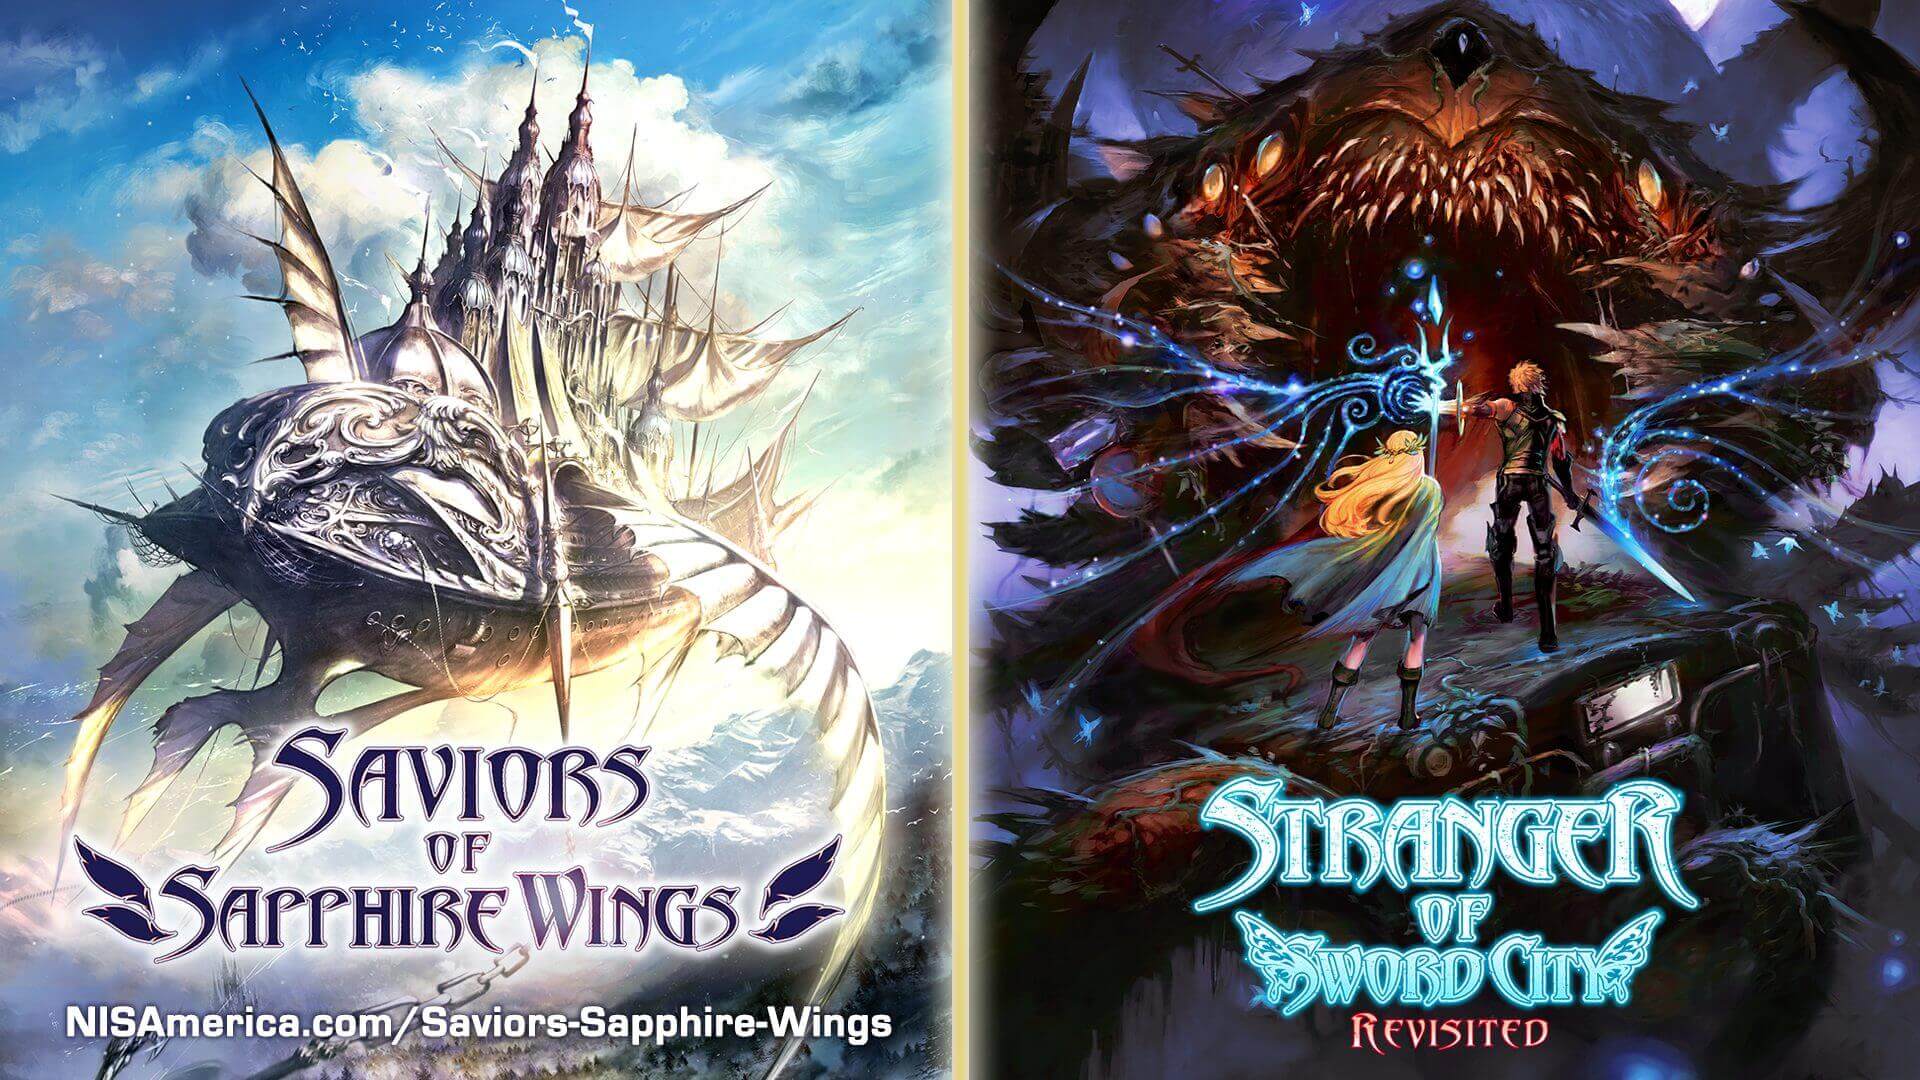 instal the last version for ipod Saviors of Sapphire Wings / Stranger of Sword City Revisited